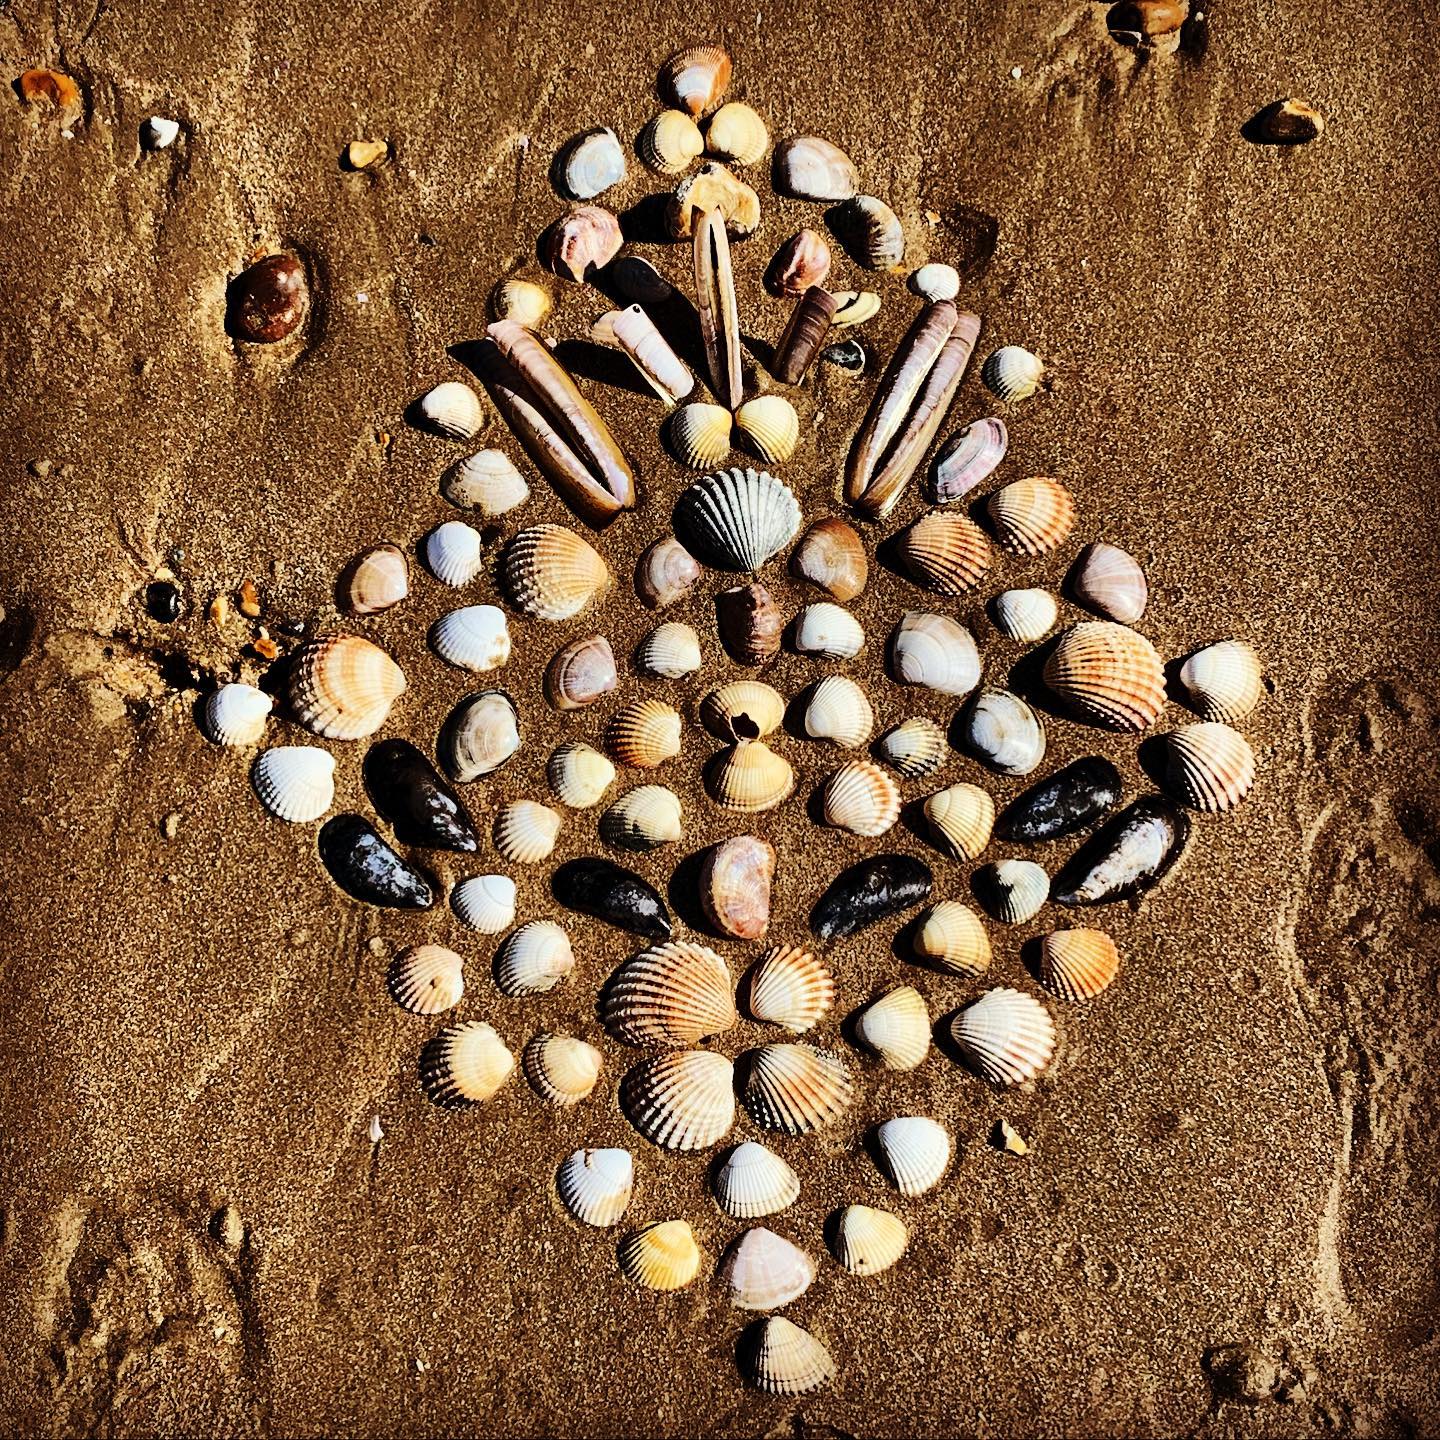 So many seashells to discover at low tide.  Hours of aimless, idle fun collecting and arranging.  #lowtideloot #lowtidefinds #shelldoodle #shelldoodling #shelldoodles #musselshell #razorshell #skipperlimpet #cockleshell